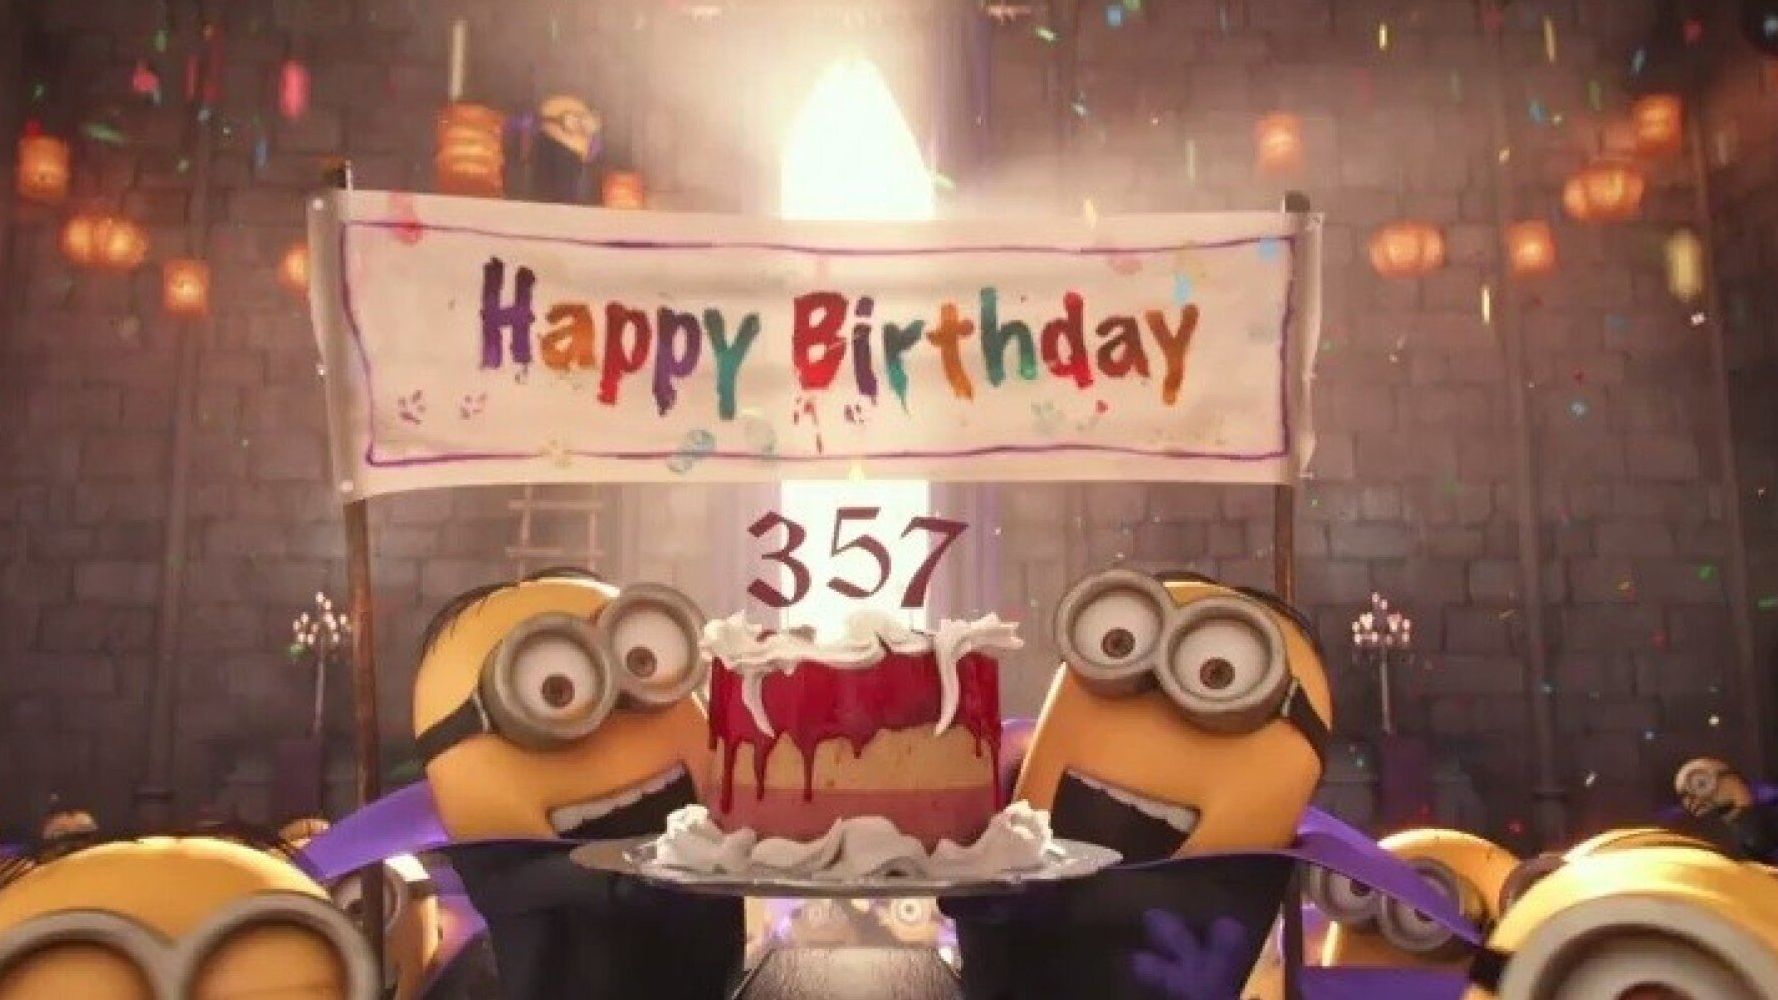 ‘Minions' Film Trailer ‘Despicable Me' SpinOff Preview Unveiled